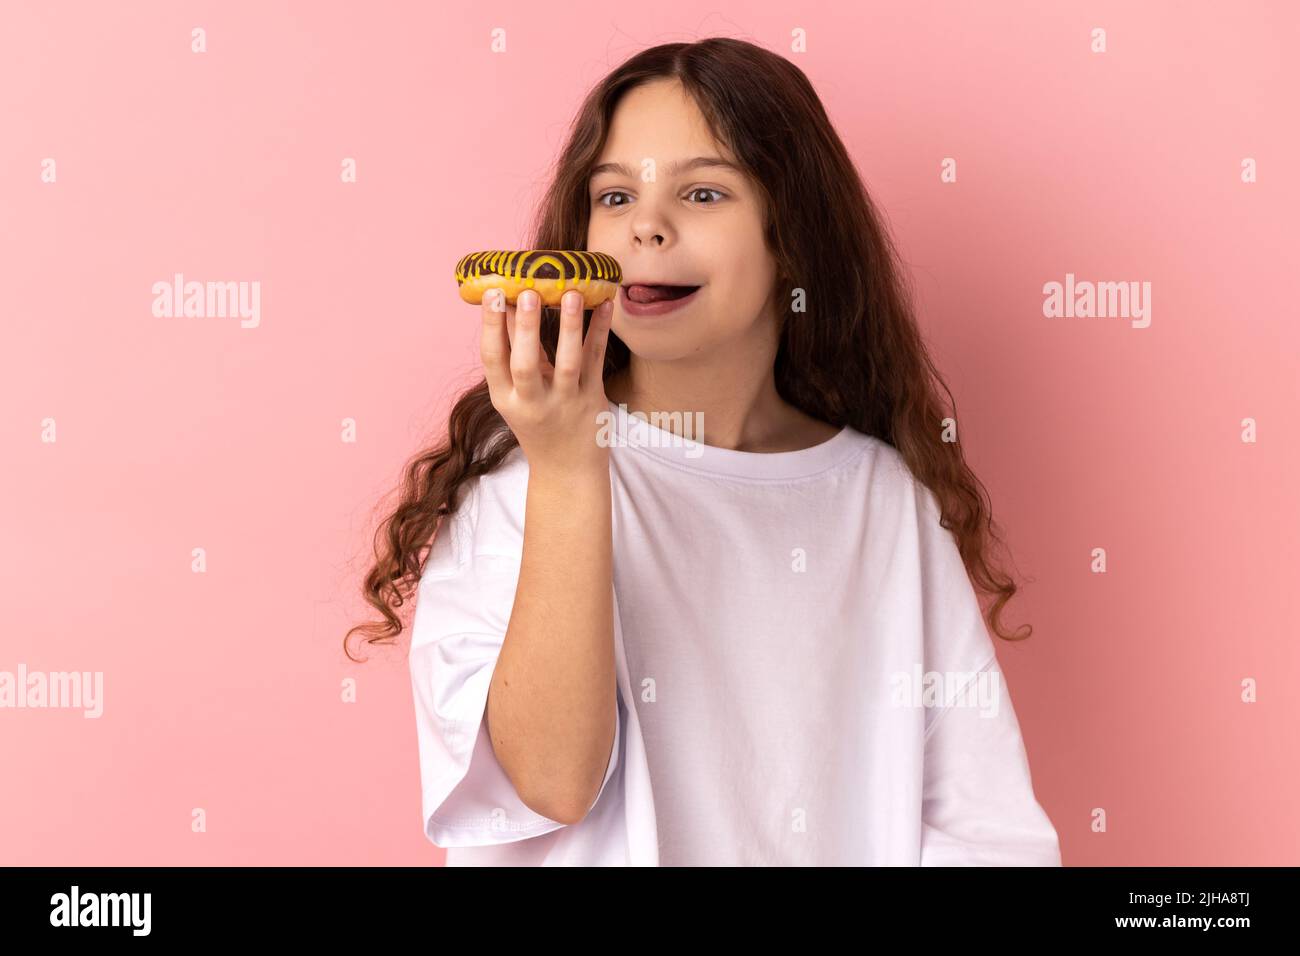 Portrait of delighted cute little girl wearing white T-shirt licking delicious donut, looking with desire to eat sweet dessert, showing tongue out. Indoor studio shot isolated on pink background. Stock Photo